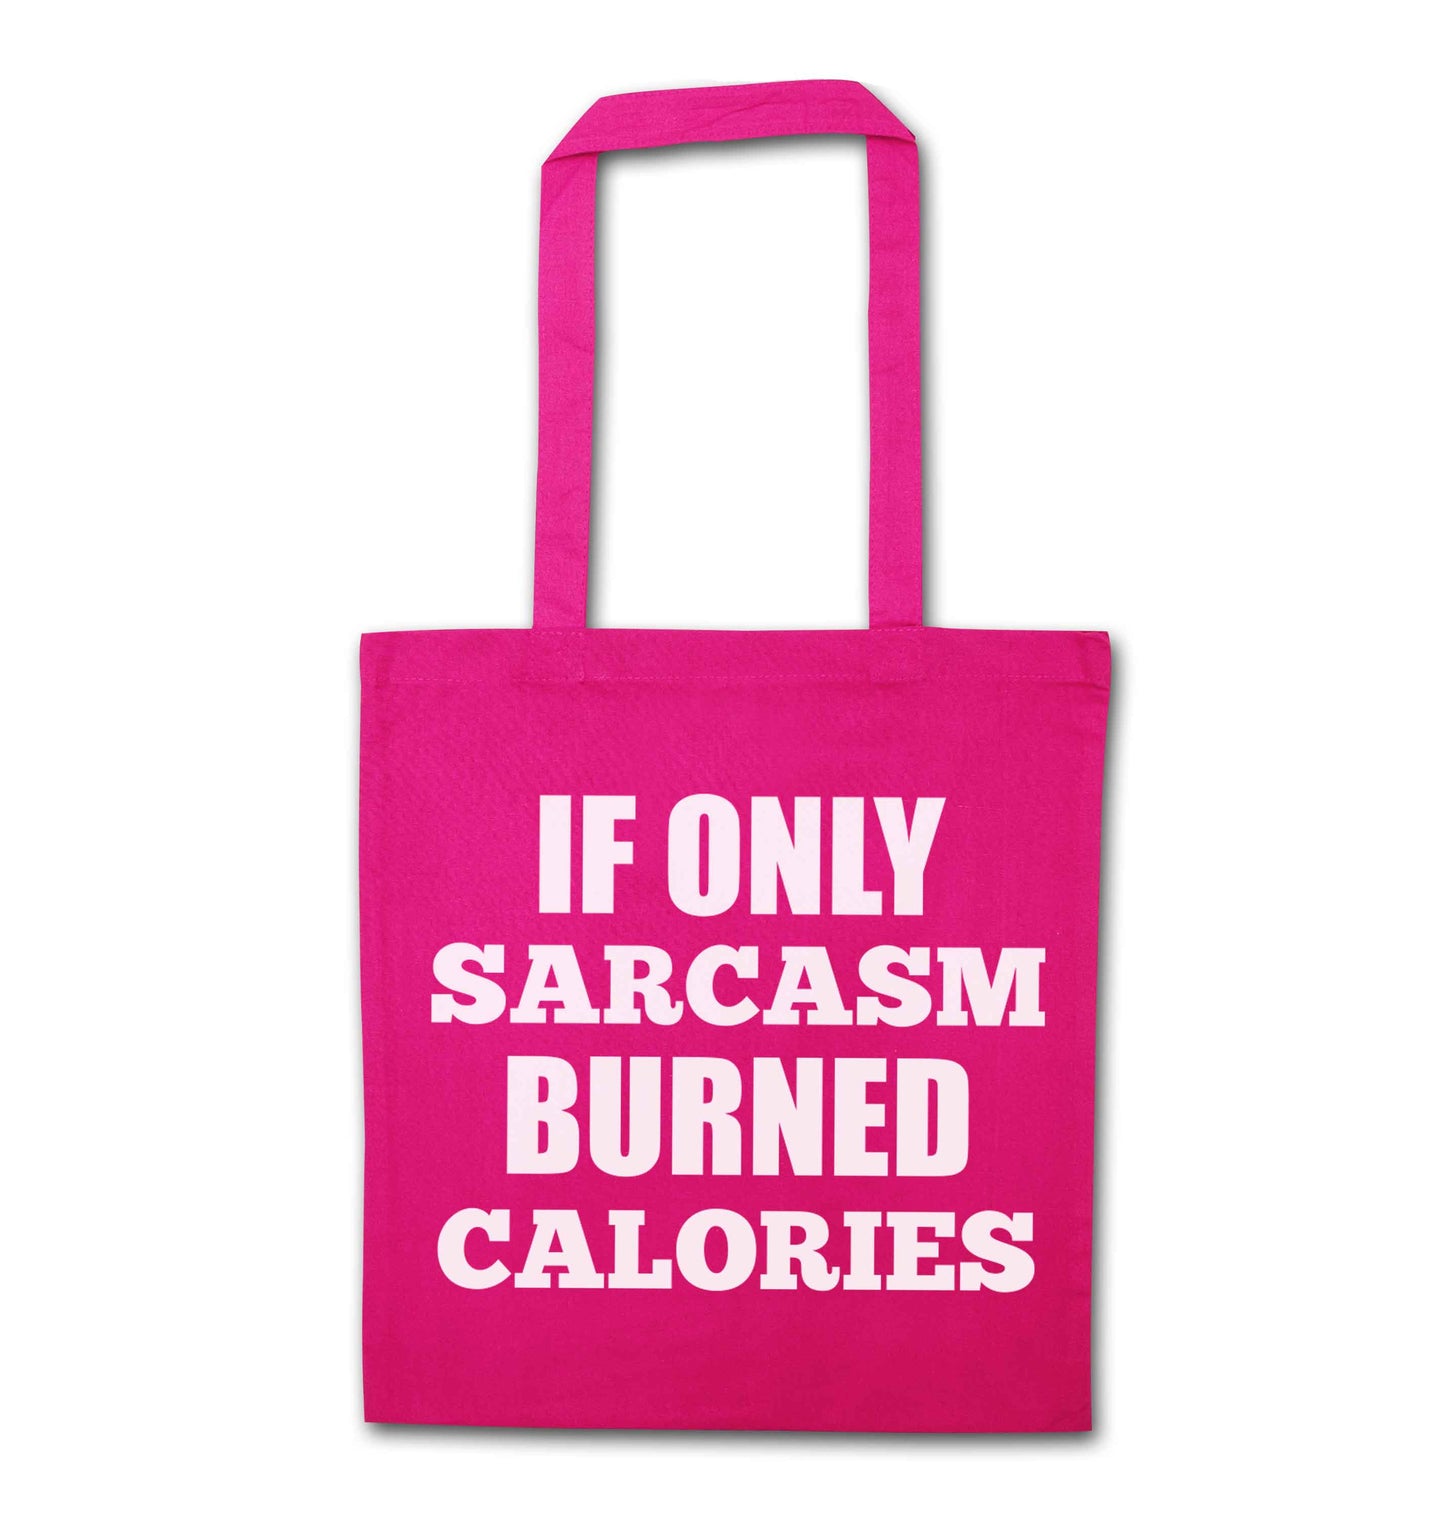 If only sarcasm burned calories pink tote bag